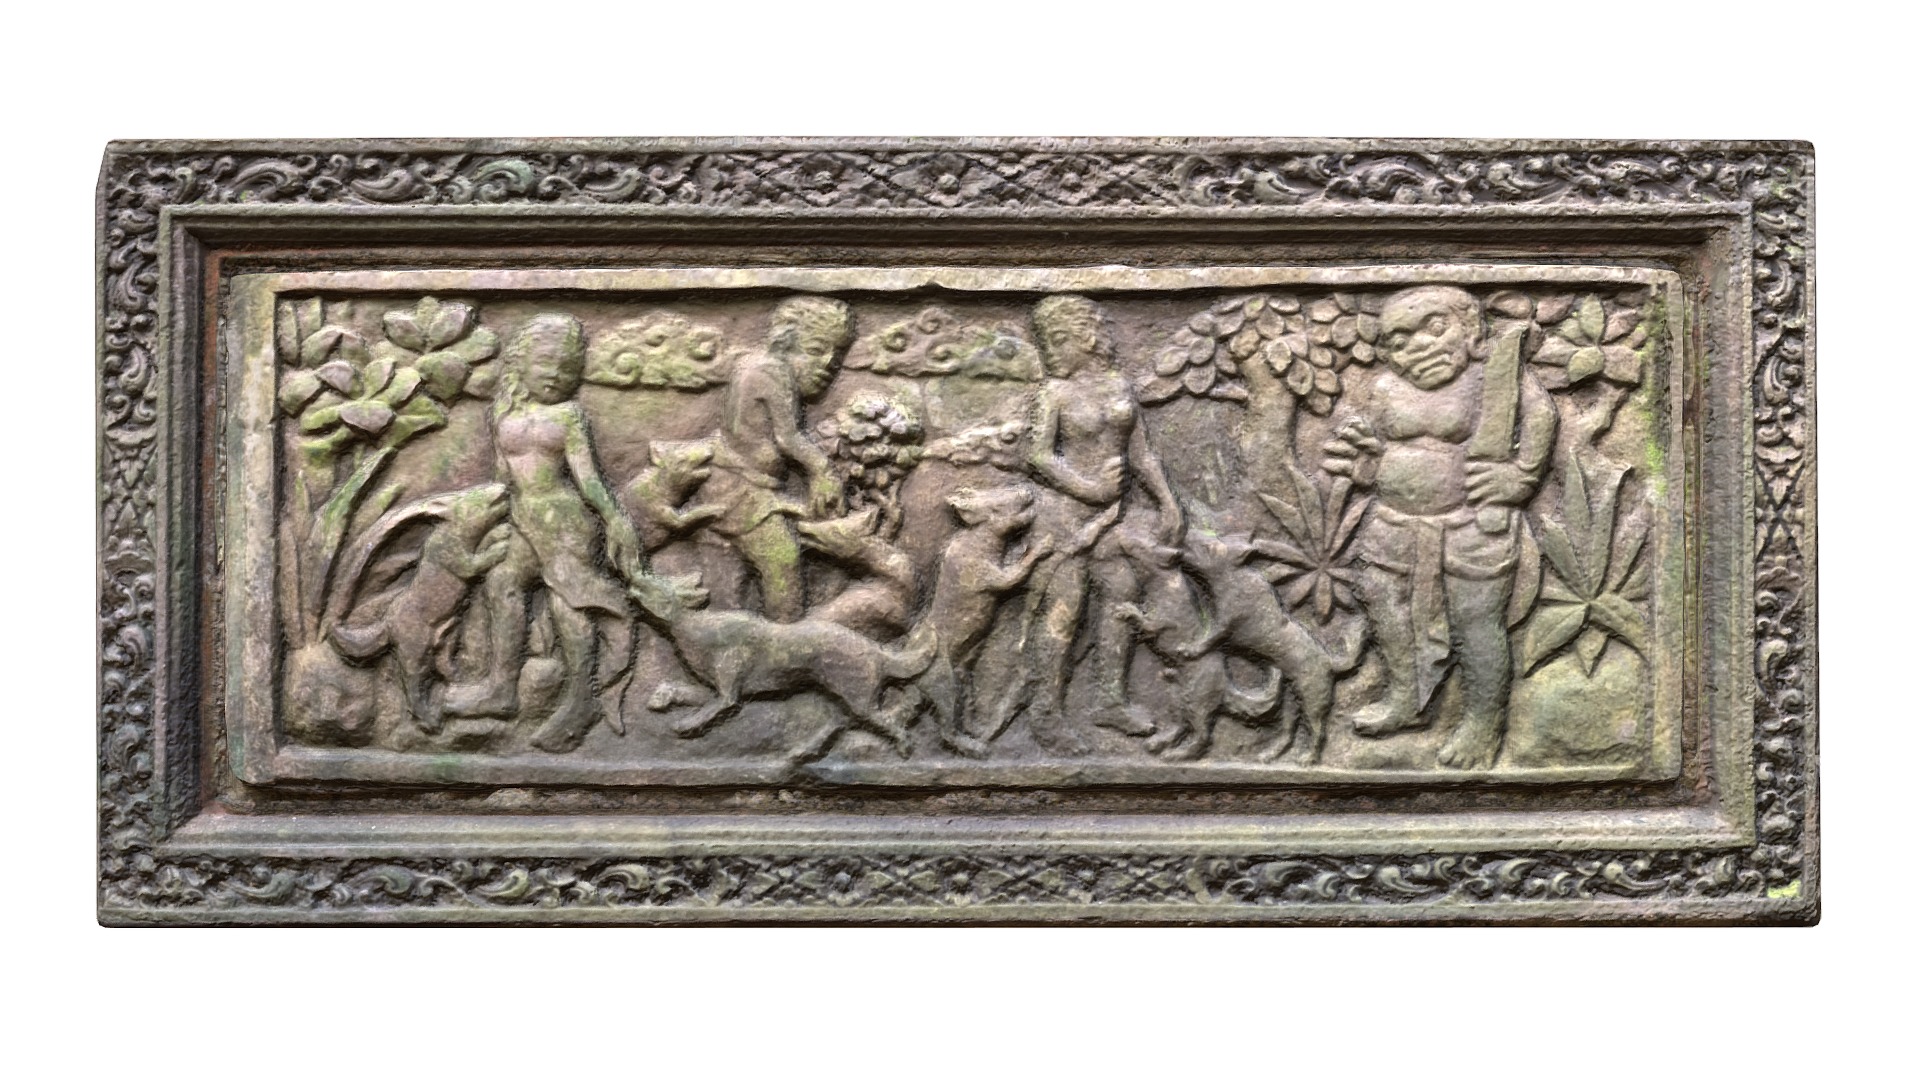 3D model Balinese Wall Barelief Decorative People Scene - This is a 3D model of the Balinese Wall Barelief Decorative People Scene. The 3D model is about a stone carving of a group of people.